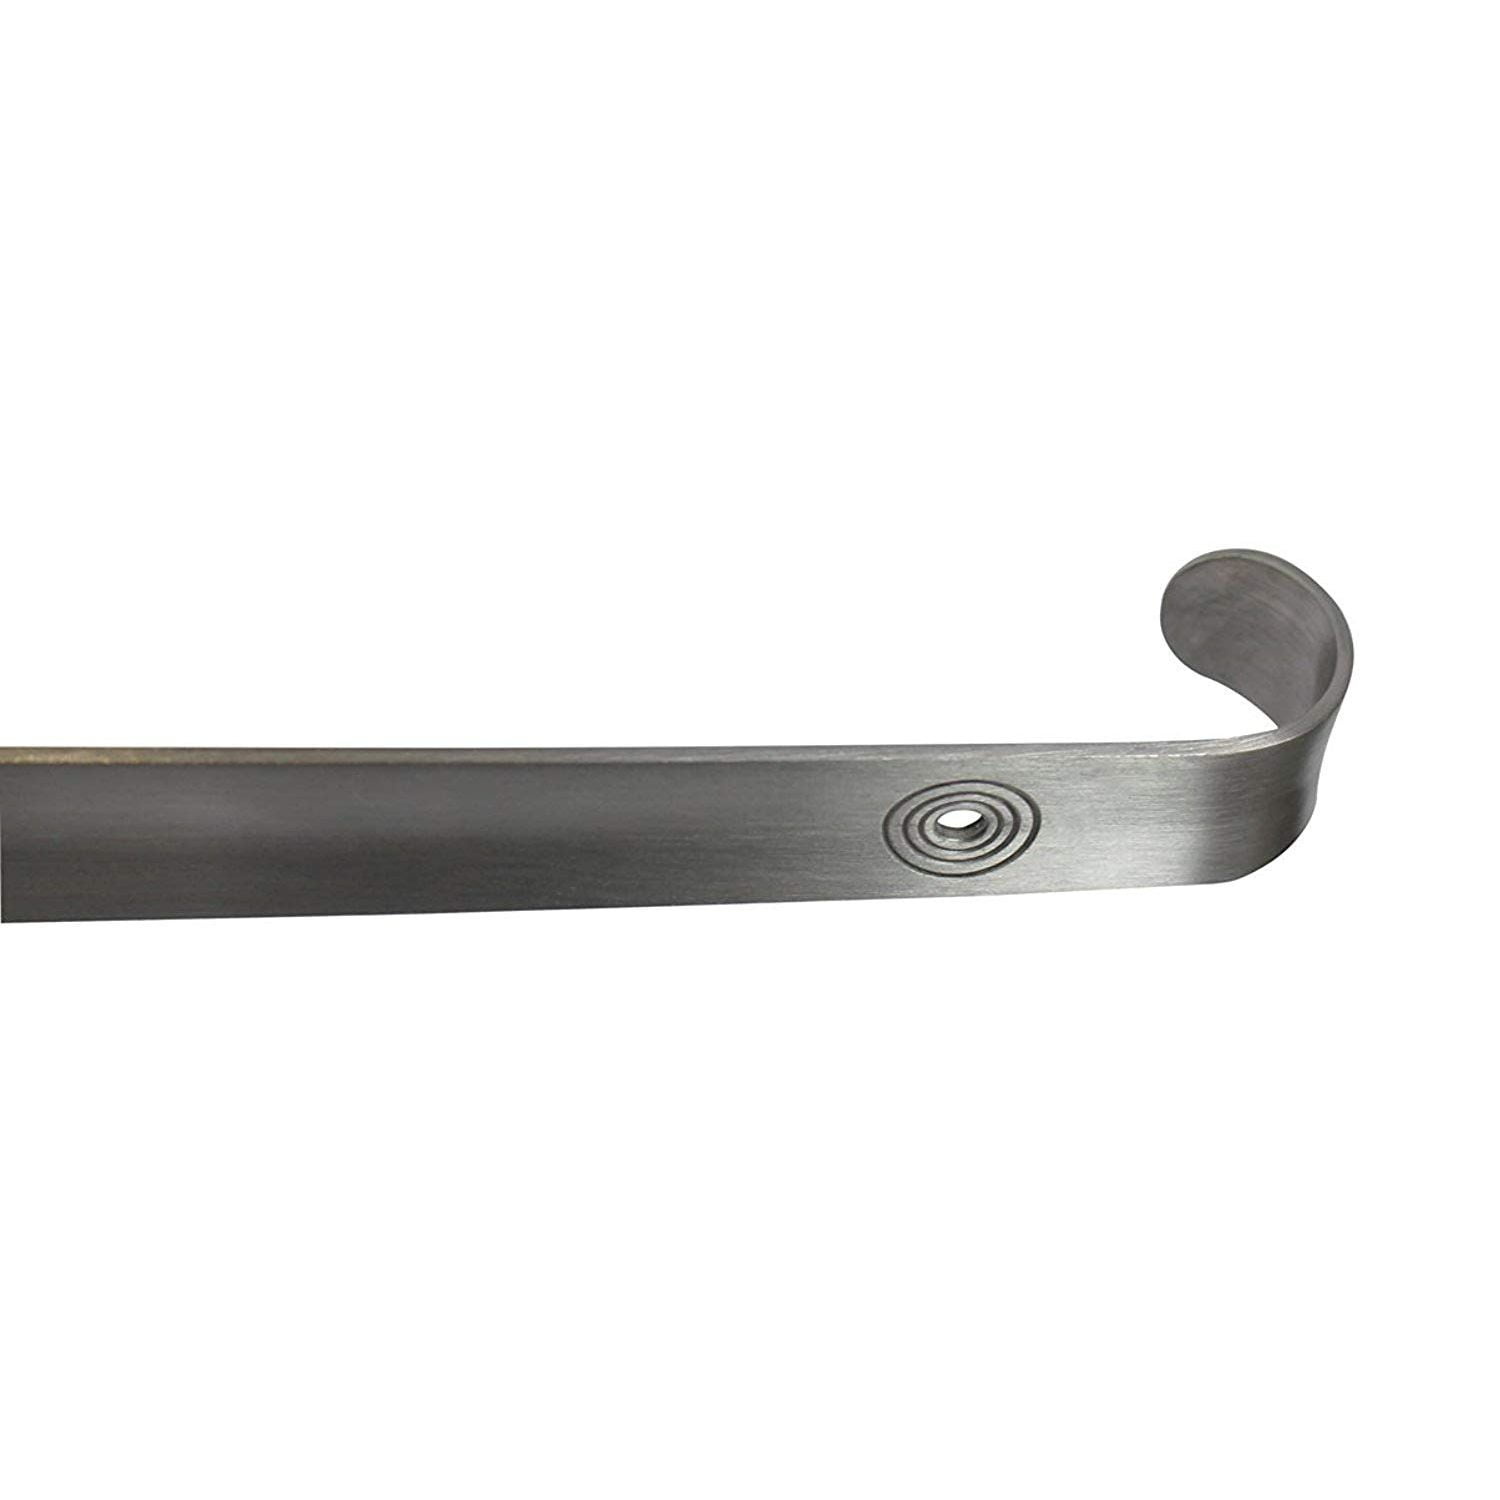 Hook-End Stainless Steel Shoe Horn for 